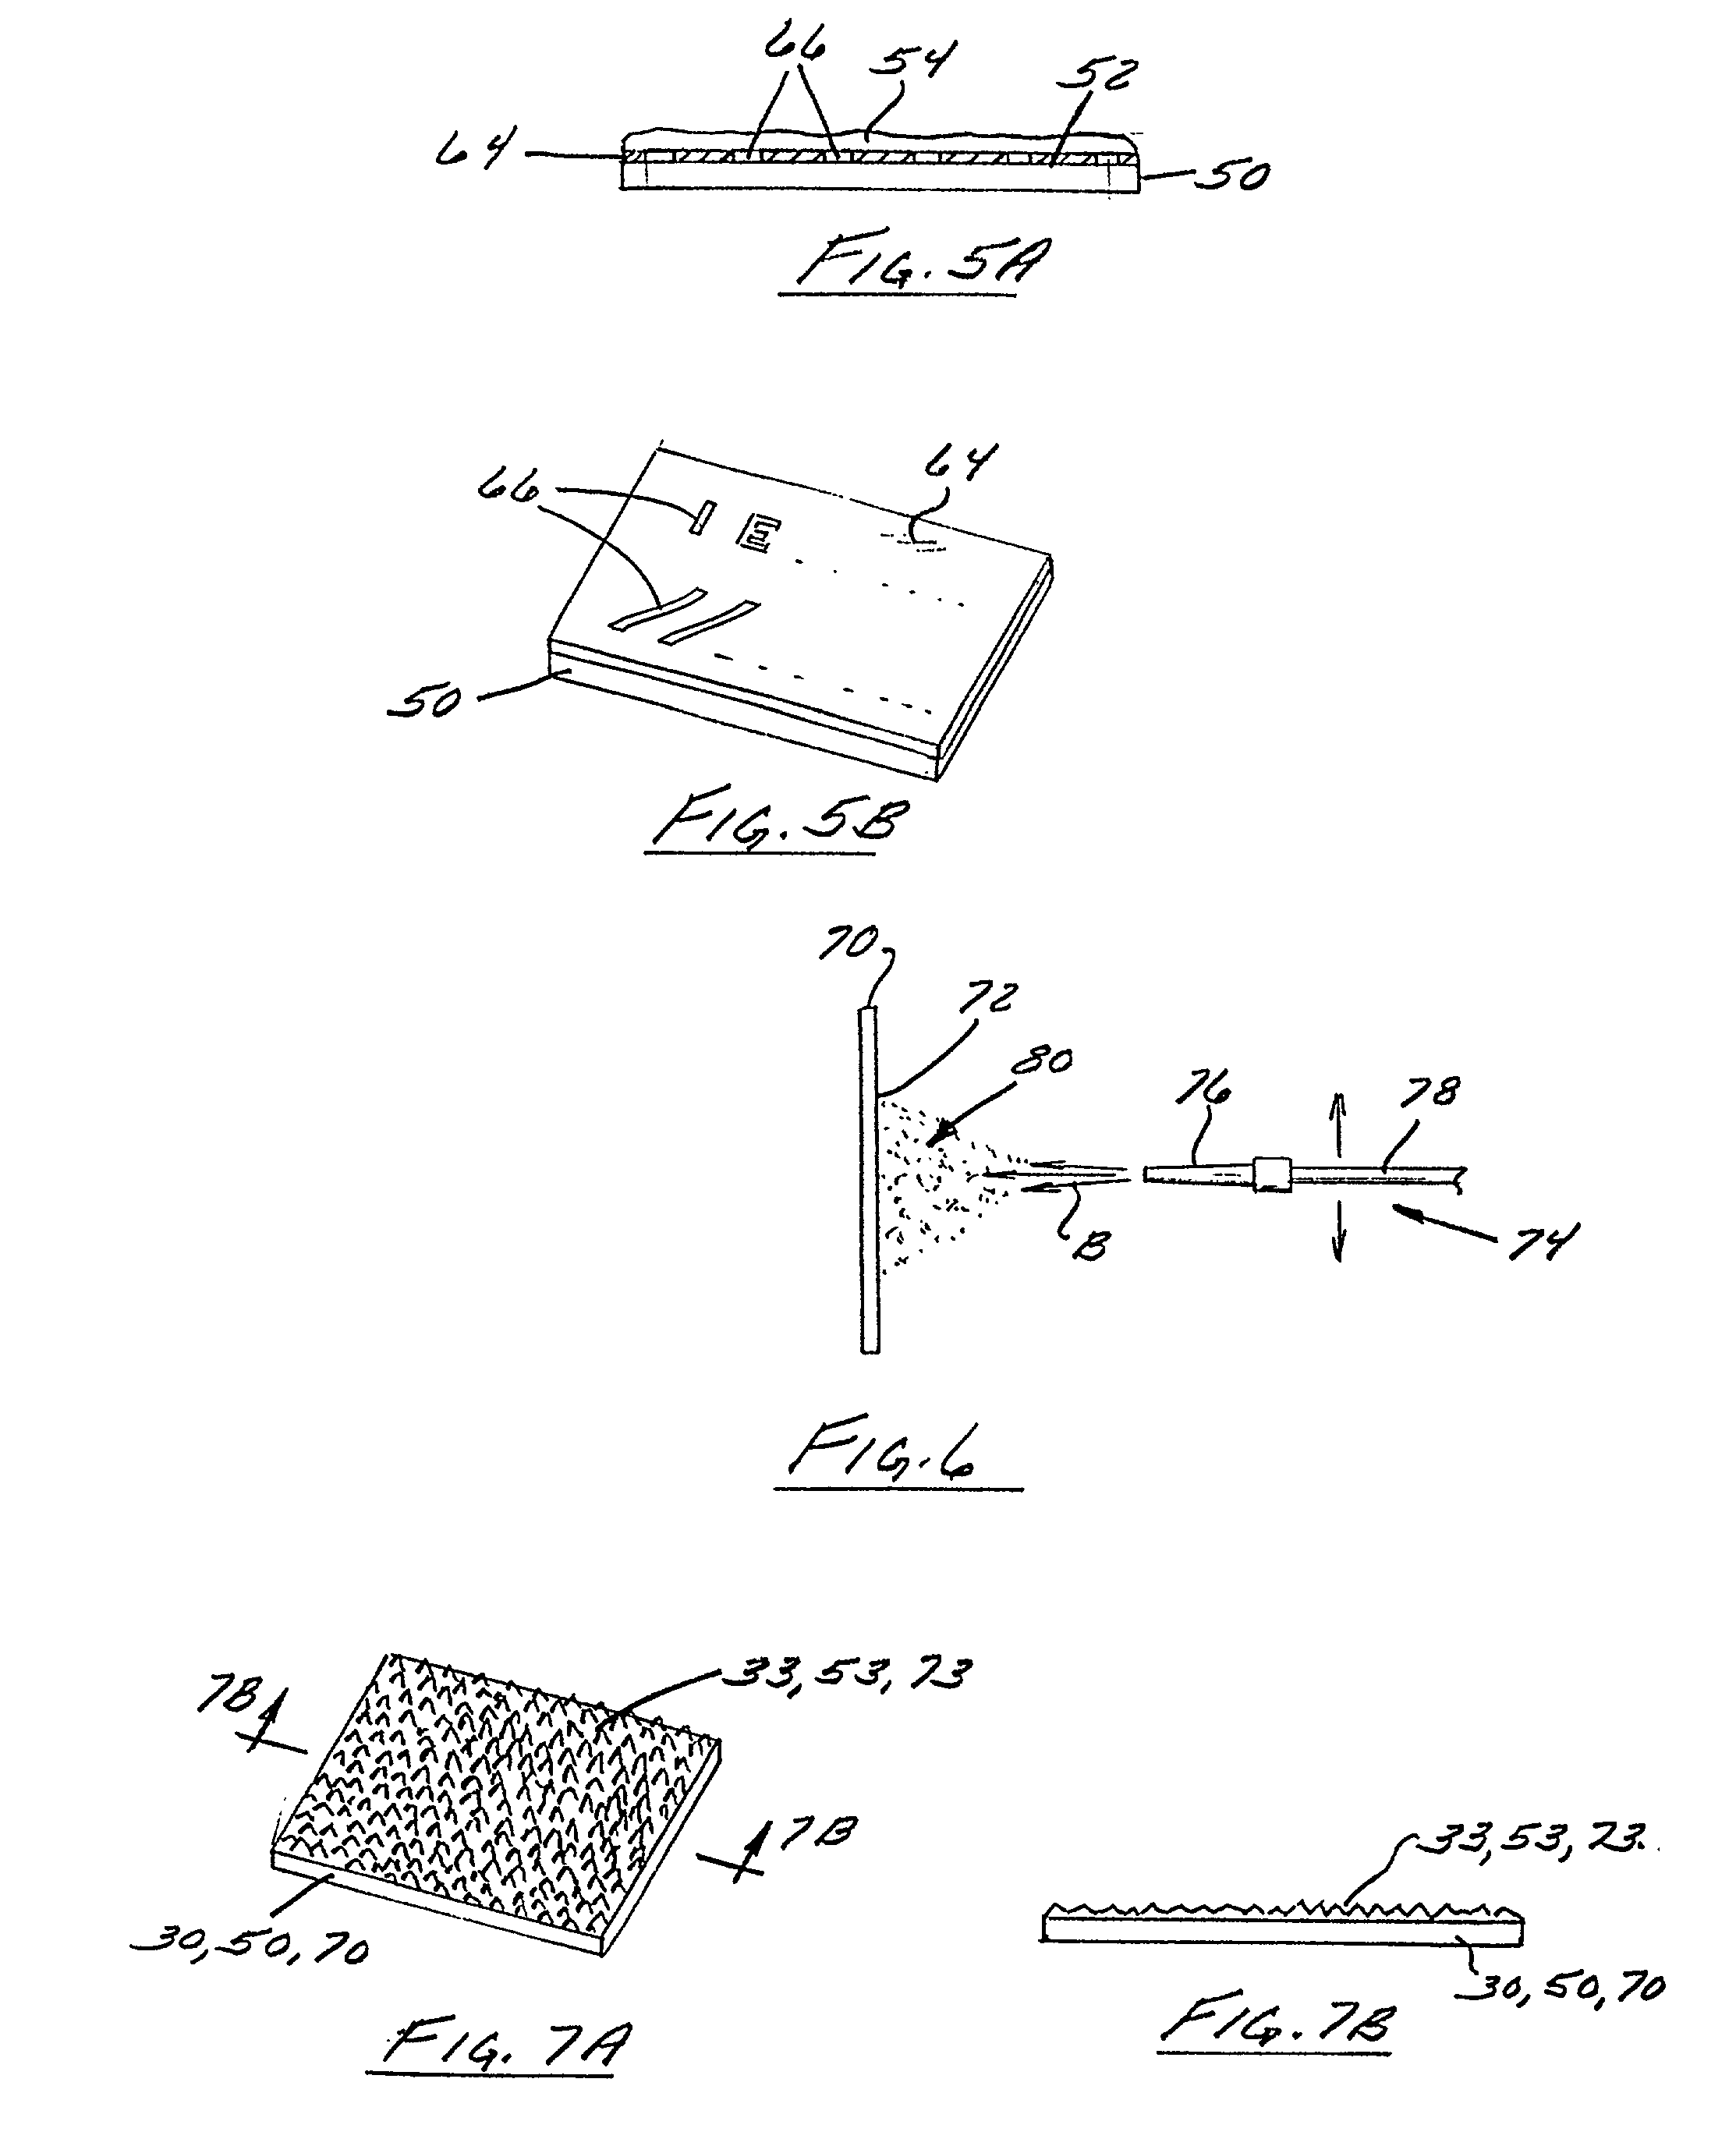 Method of manufacturing a diffuser master using a blasting agent